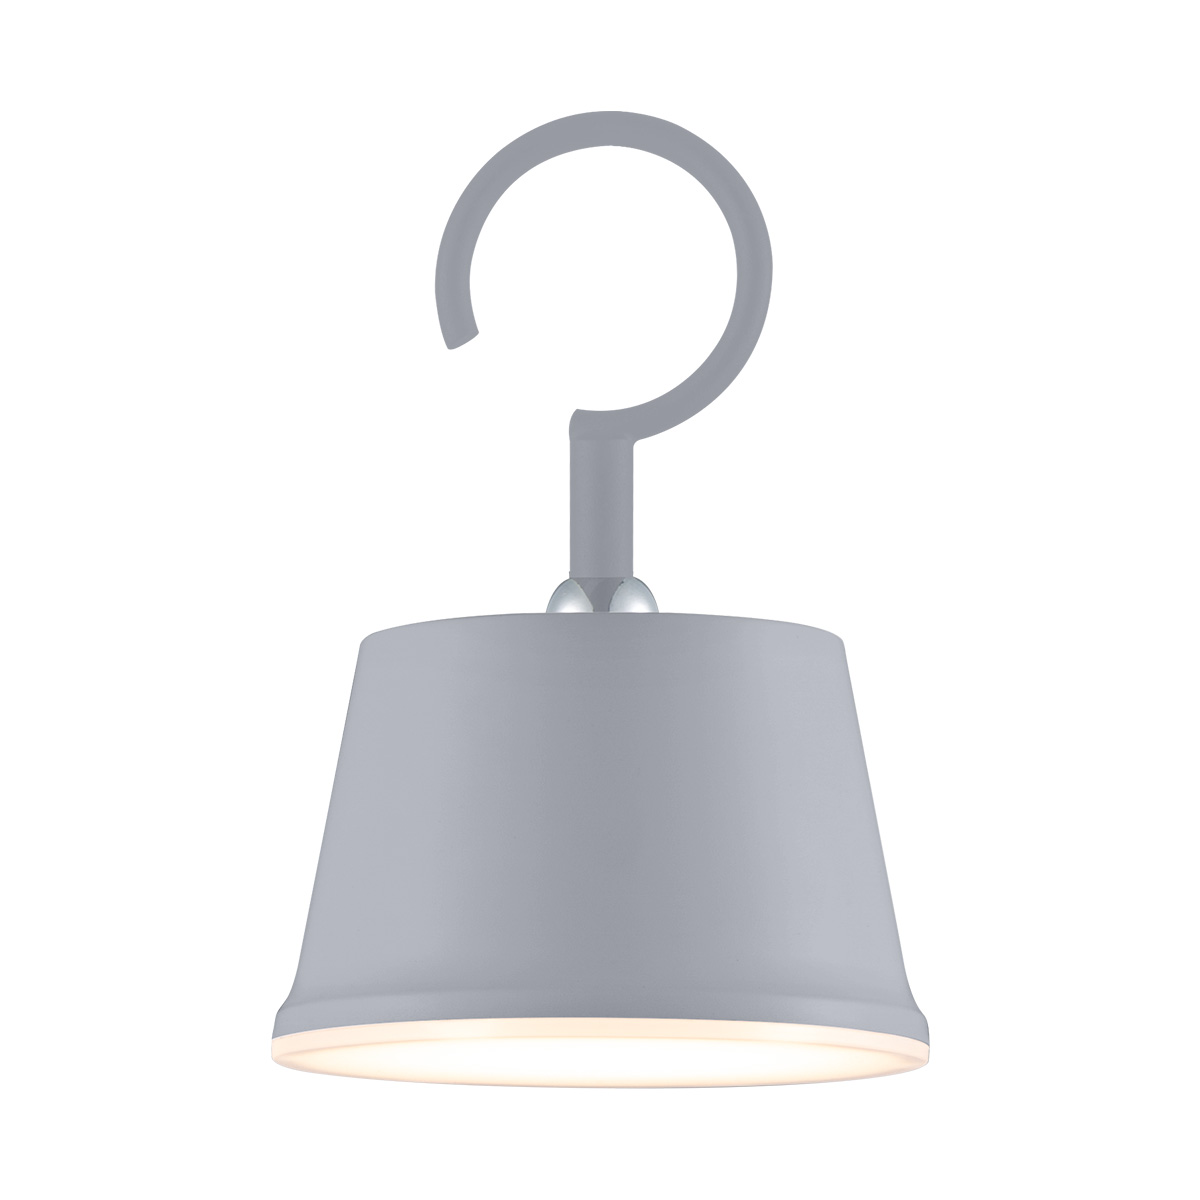 Tangla lighting - TLP7644-01GY - LED Pendant lamp - rechargeable plastic and metal in grey - mini LED pendant